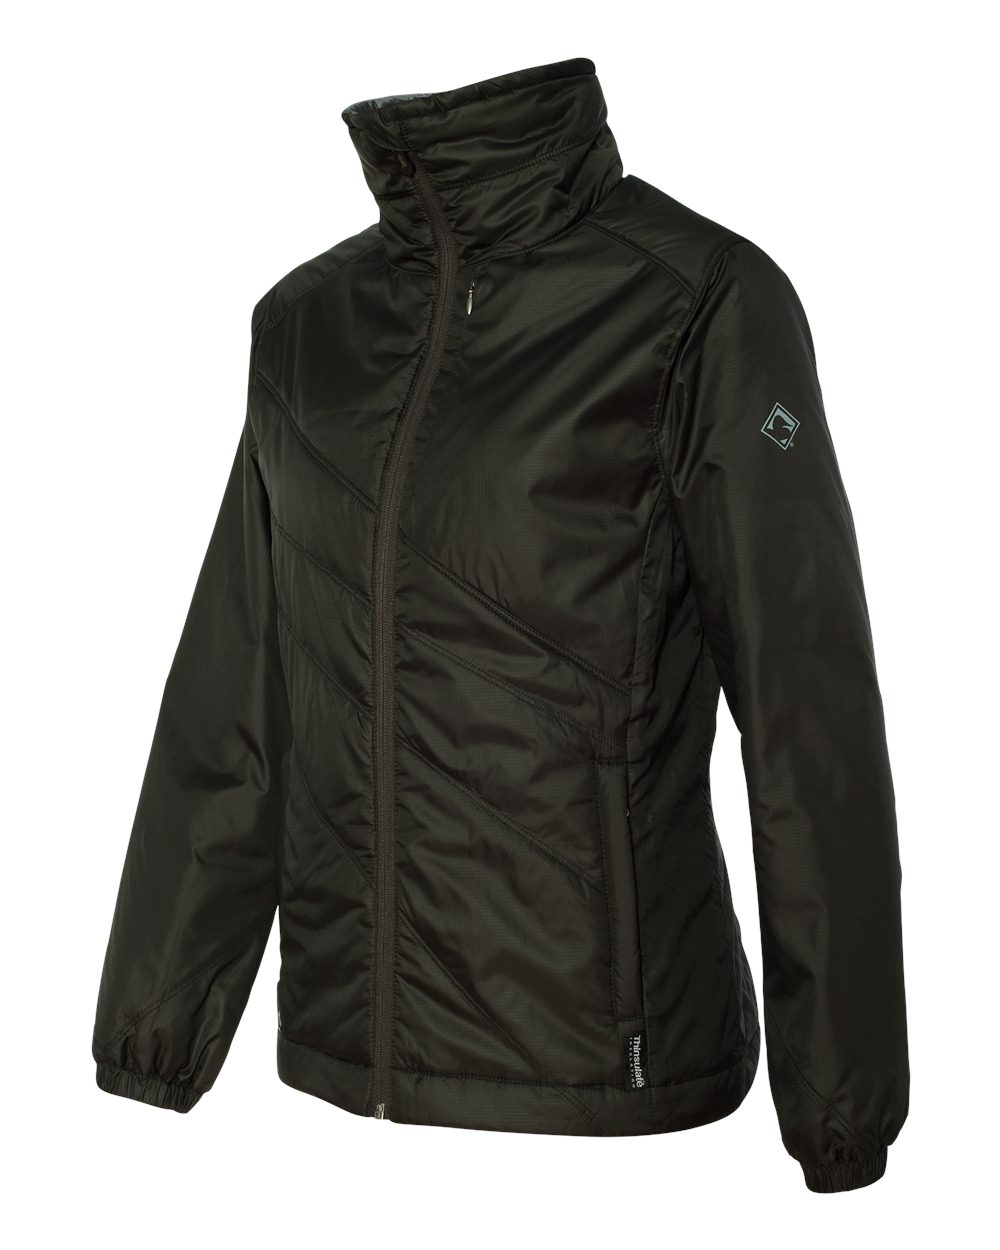 DRI DUCK 9413 - Solstice Ladies' Thinsulate Lined Puffer Jacket